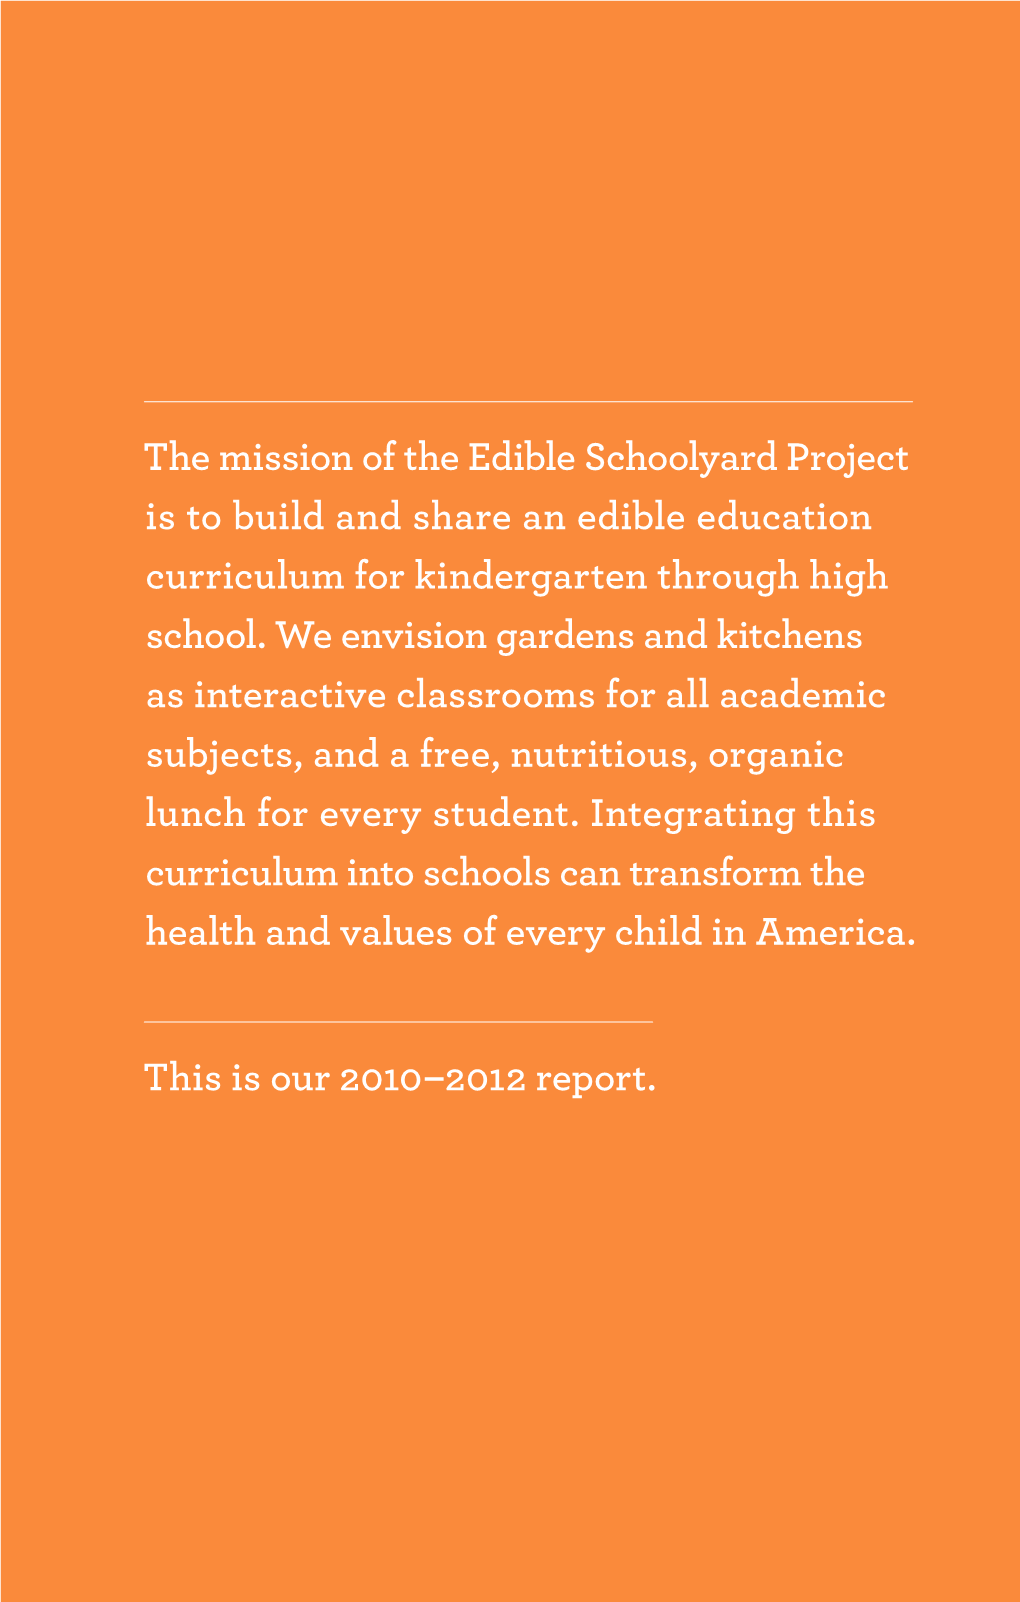 The Mission of the Edible Schoolyard Project Is to Build and Share an Edible Education Curriculum for Kindergarten Through High School